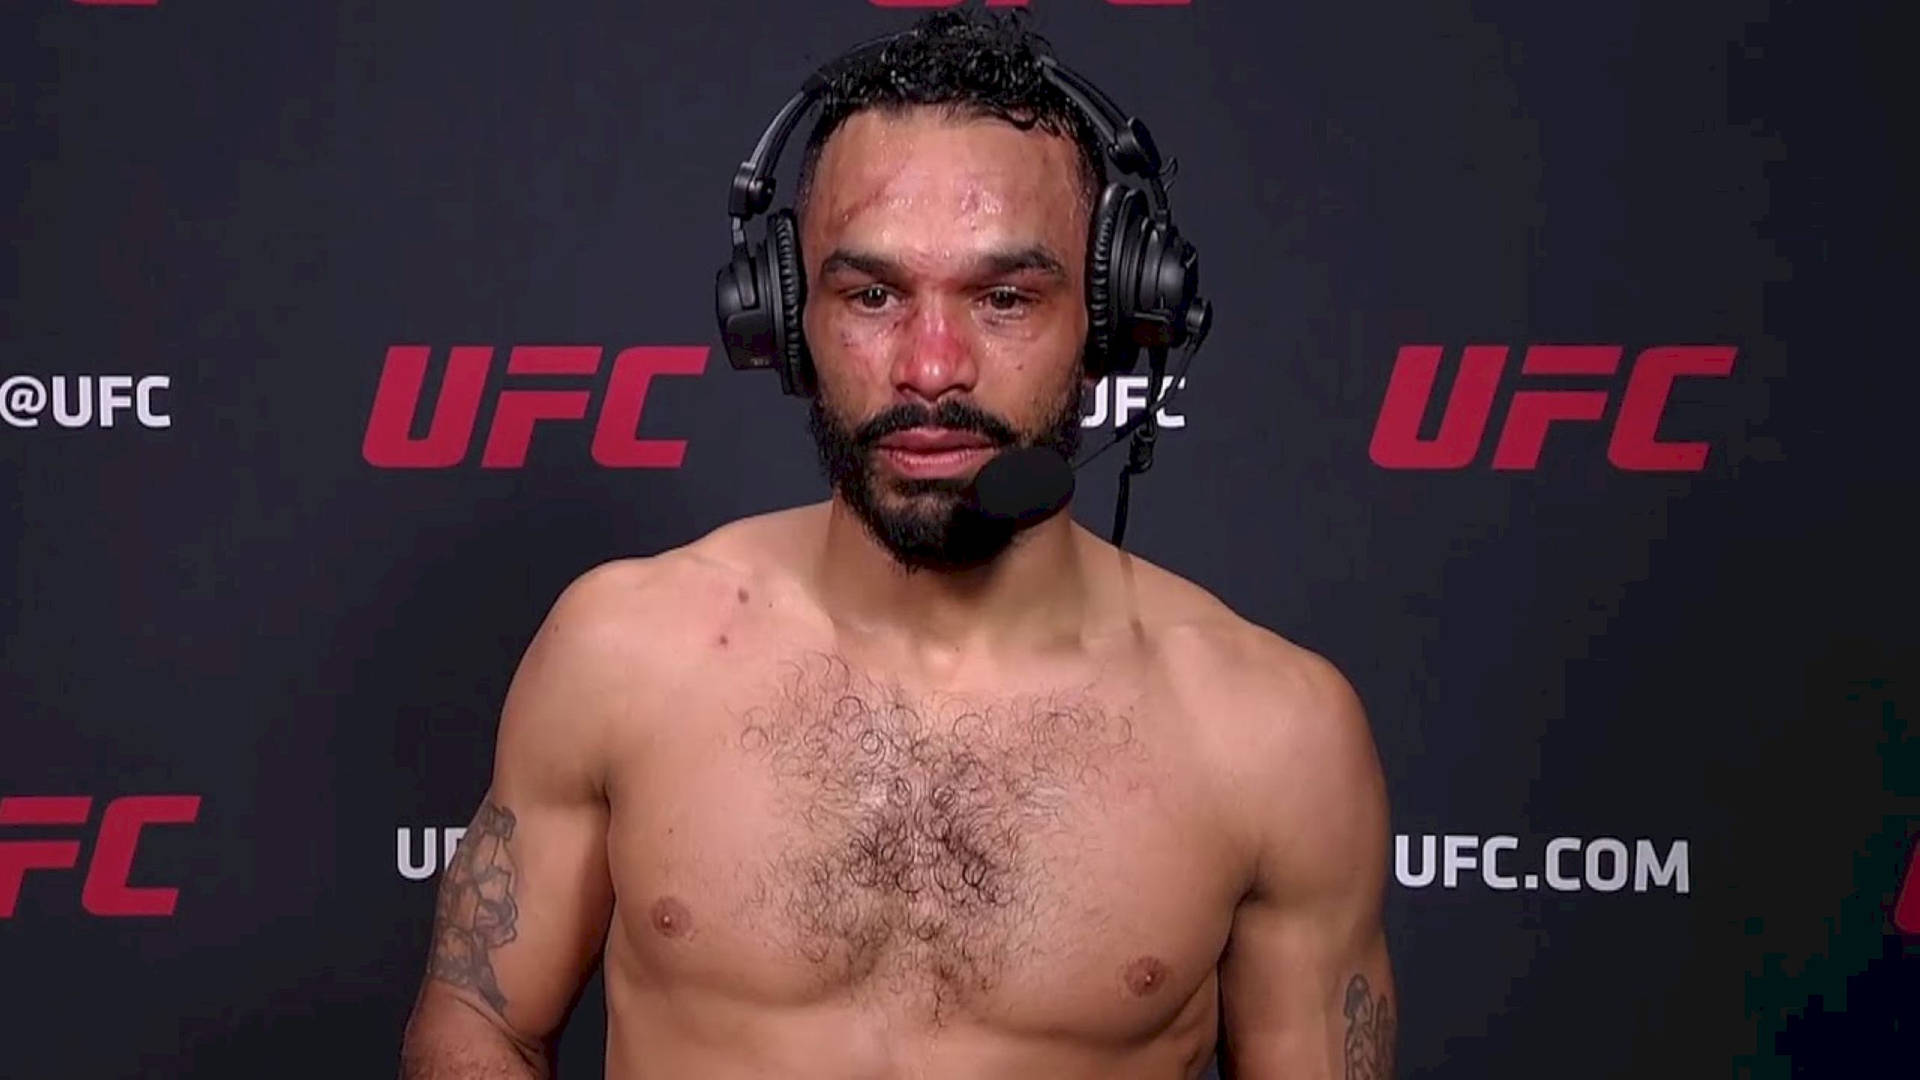 Exhausted Rob Font after a rigorous training session Wallpaper